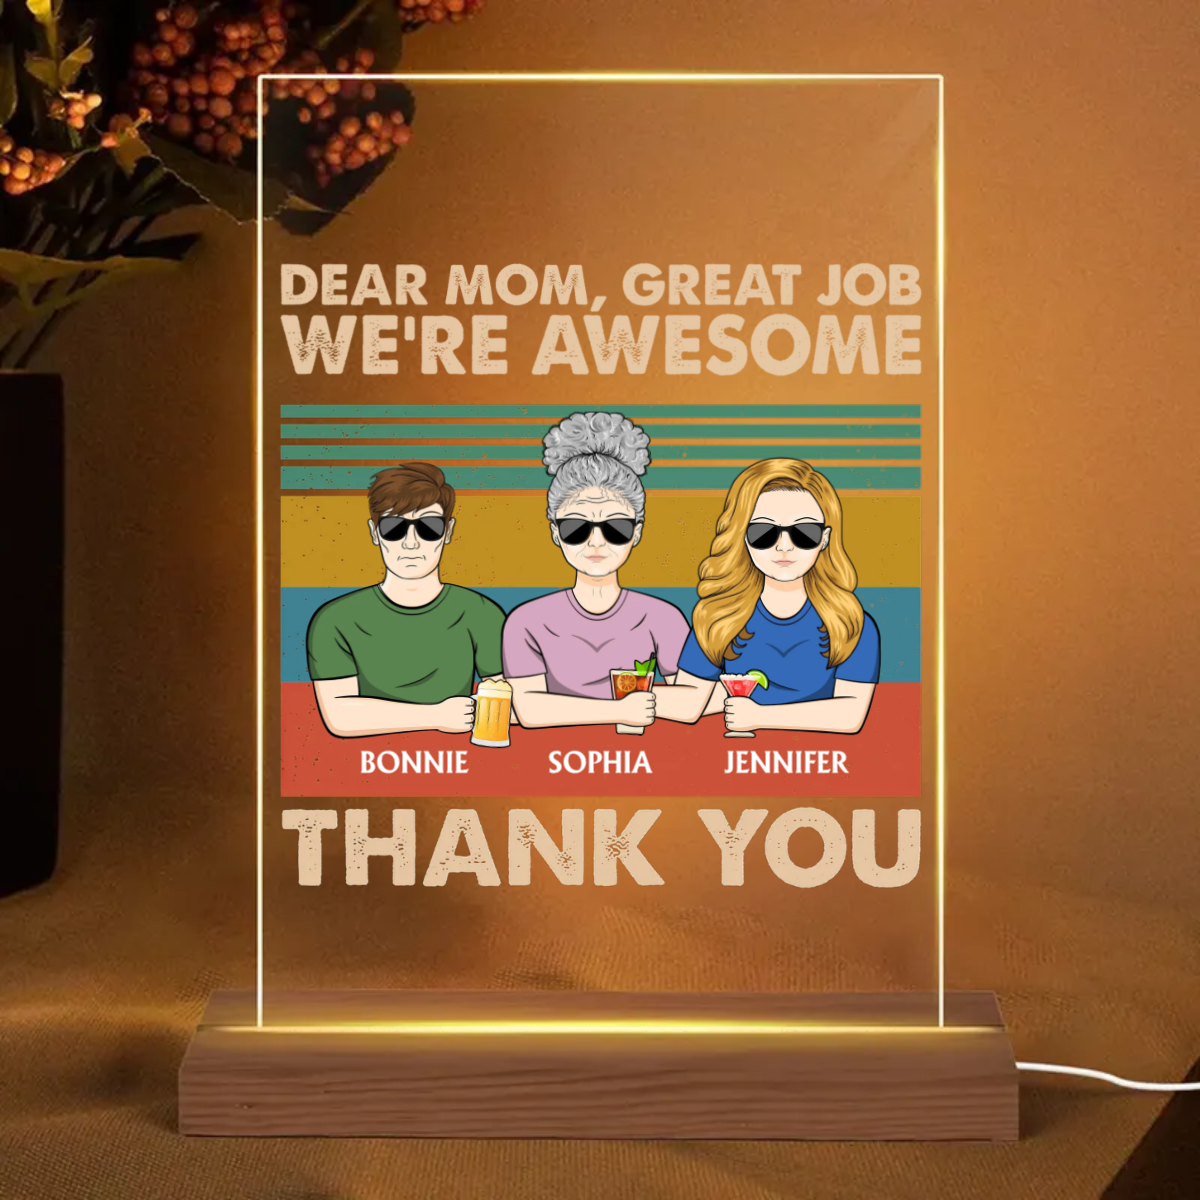 Dear Mom Mum Great Job We're Awesome Thank You - Mother Gift - Personalized Rectangle Acrylic Plaque LED Lamp Night Light